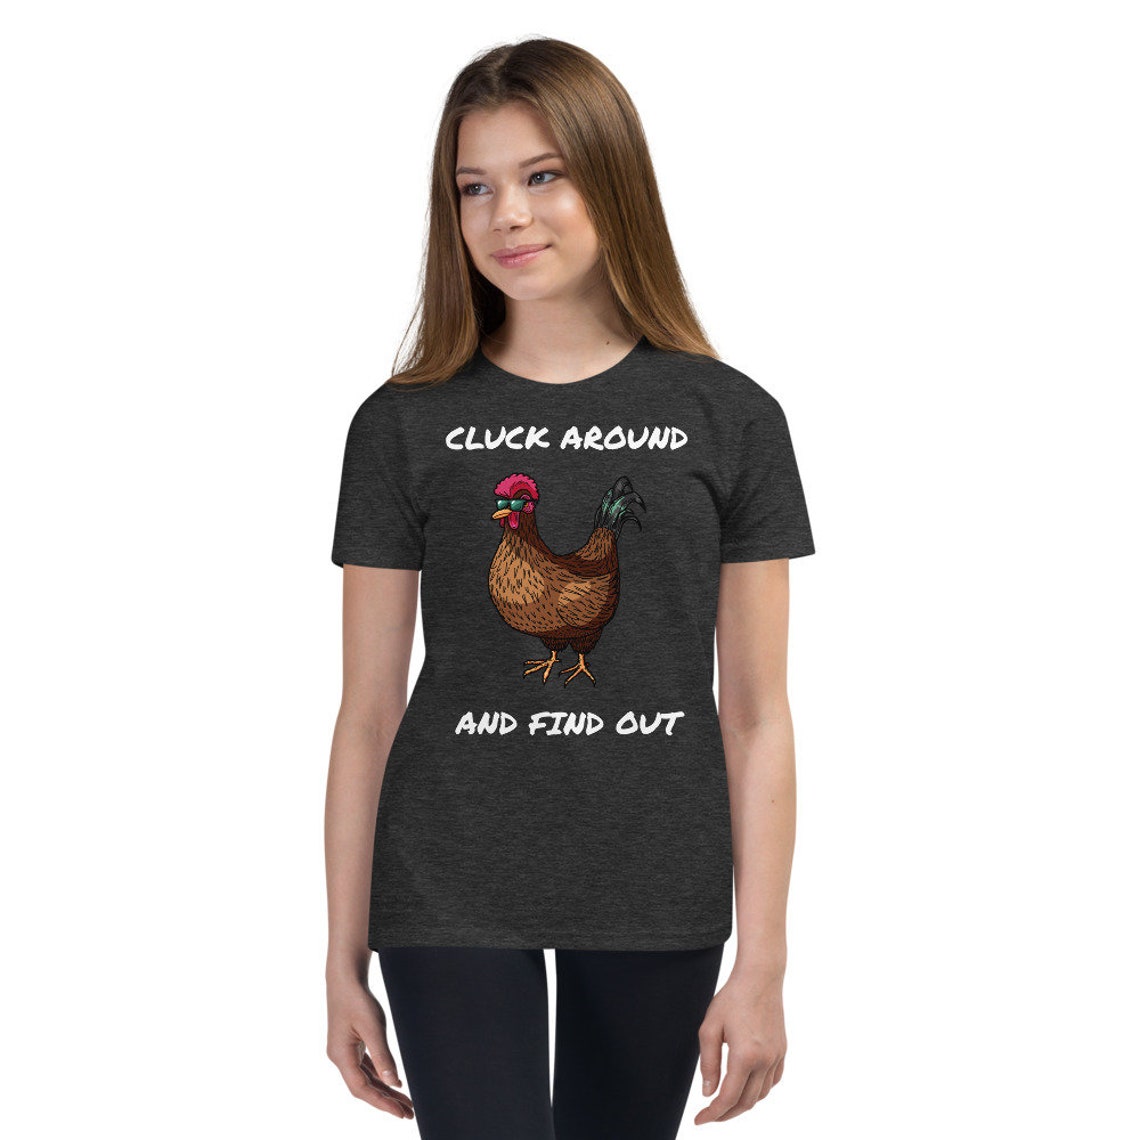 Cluck Around and Find Out Kids T-Shirt Lite Funny Snarky | Etsy